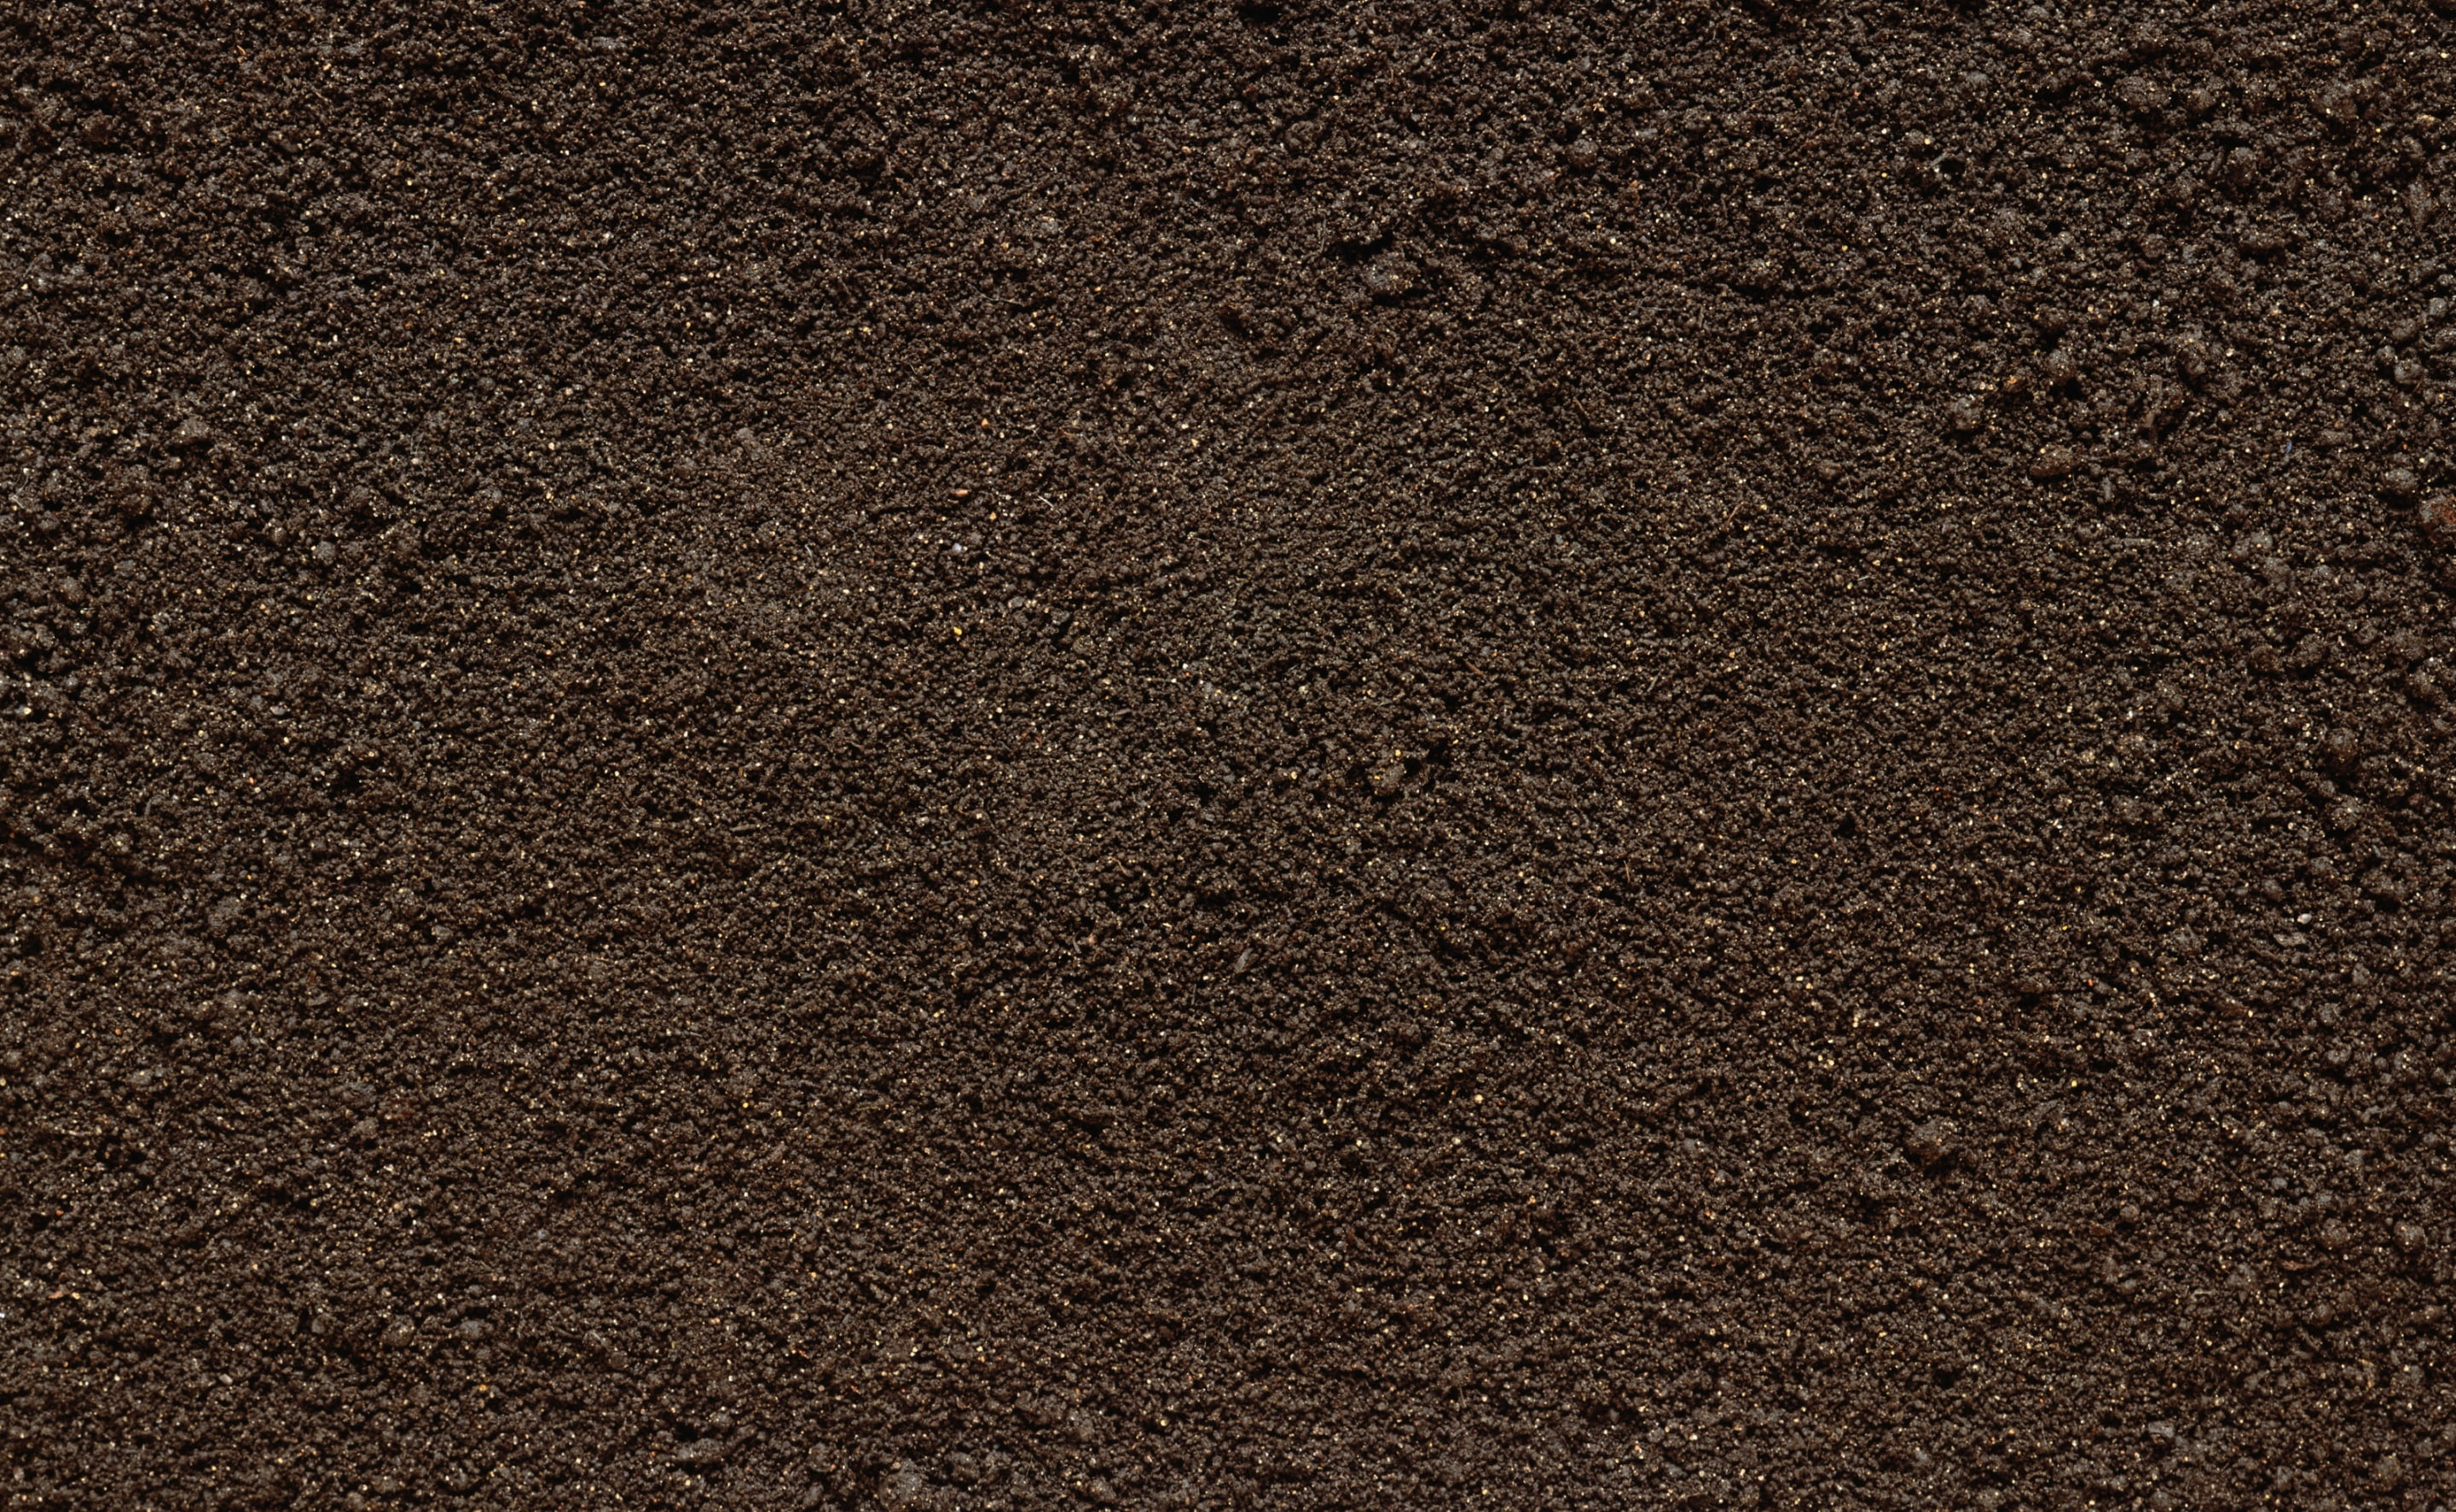 Soil, Elements, Earth, backgrounds, textured, full frame, close-up